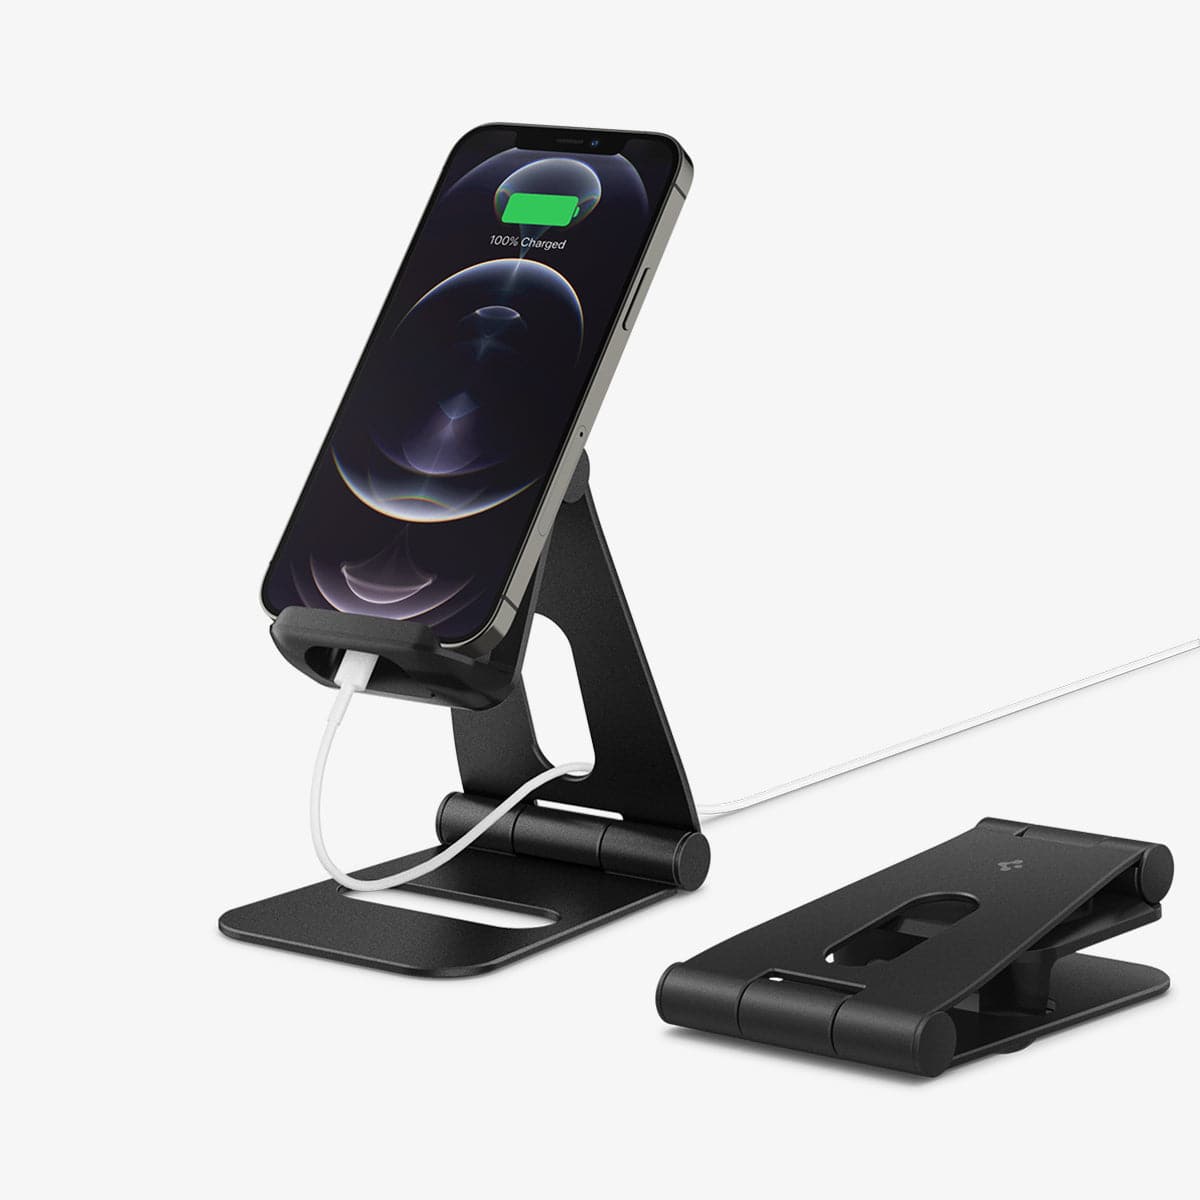 AMP02780 - S311 Charger Stand in black showing the front and back with device charging on stand